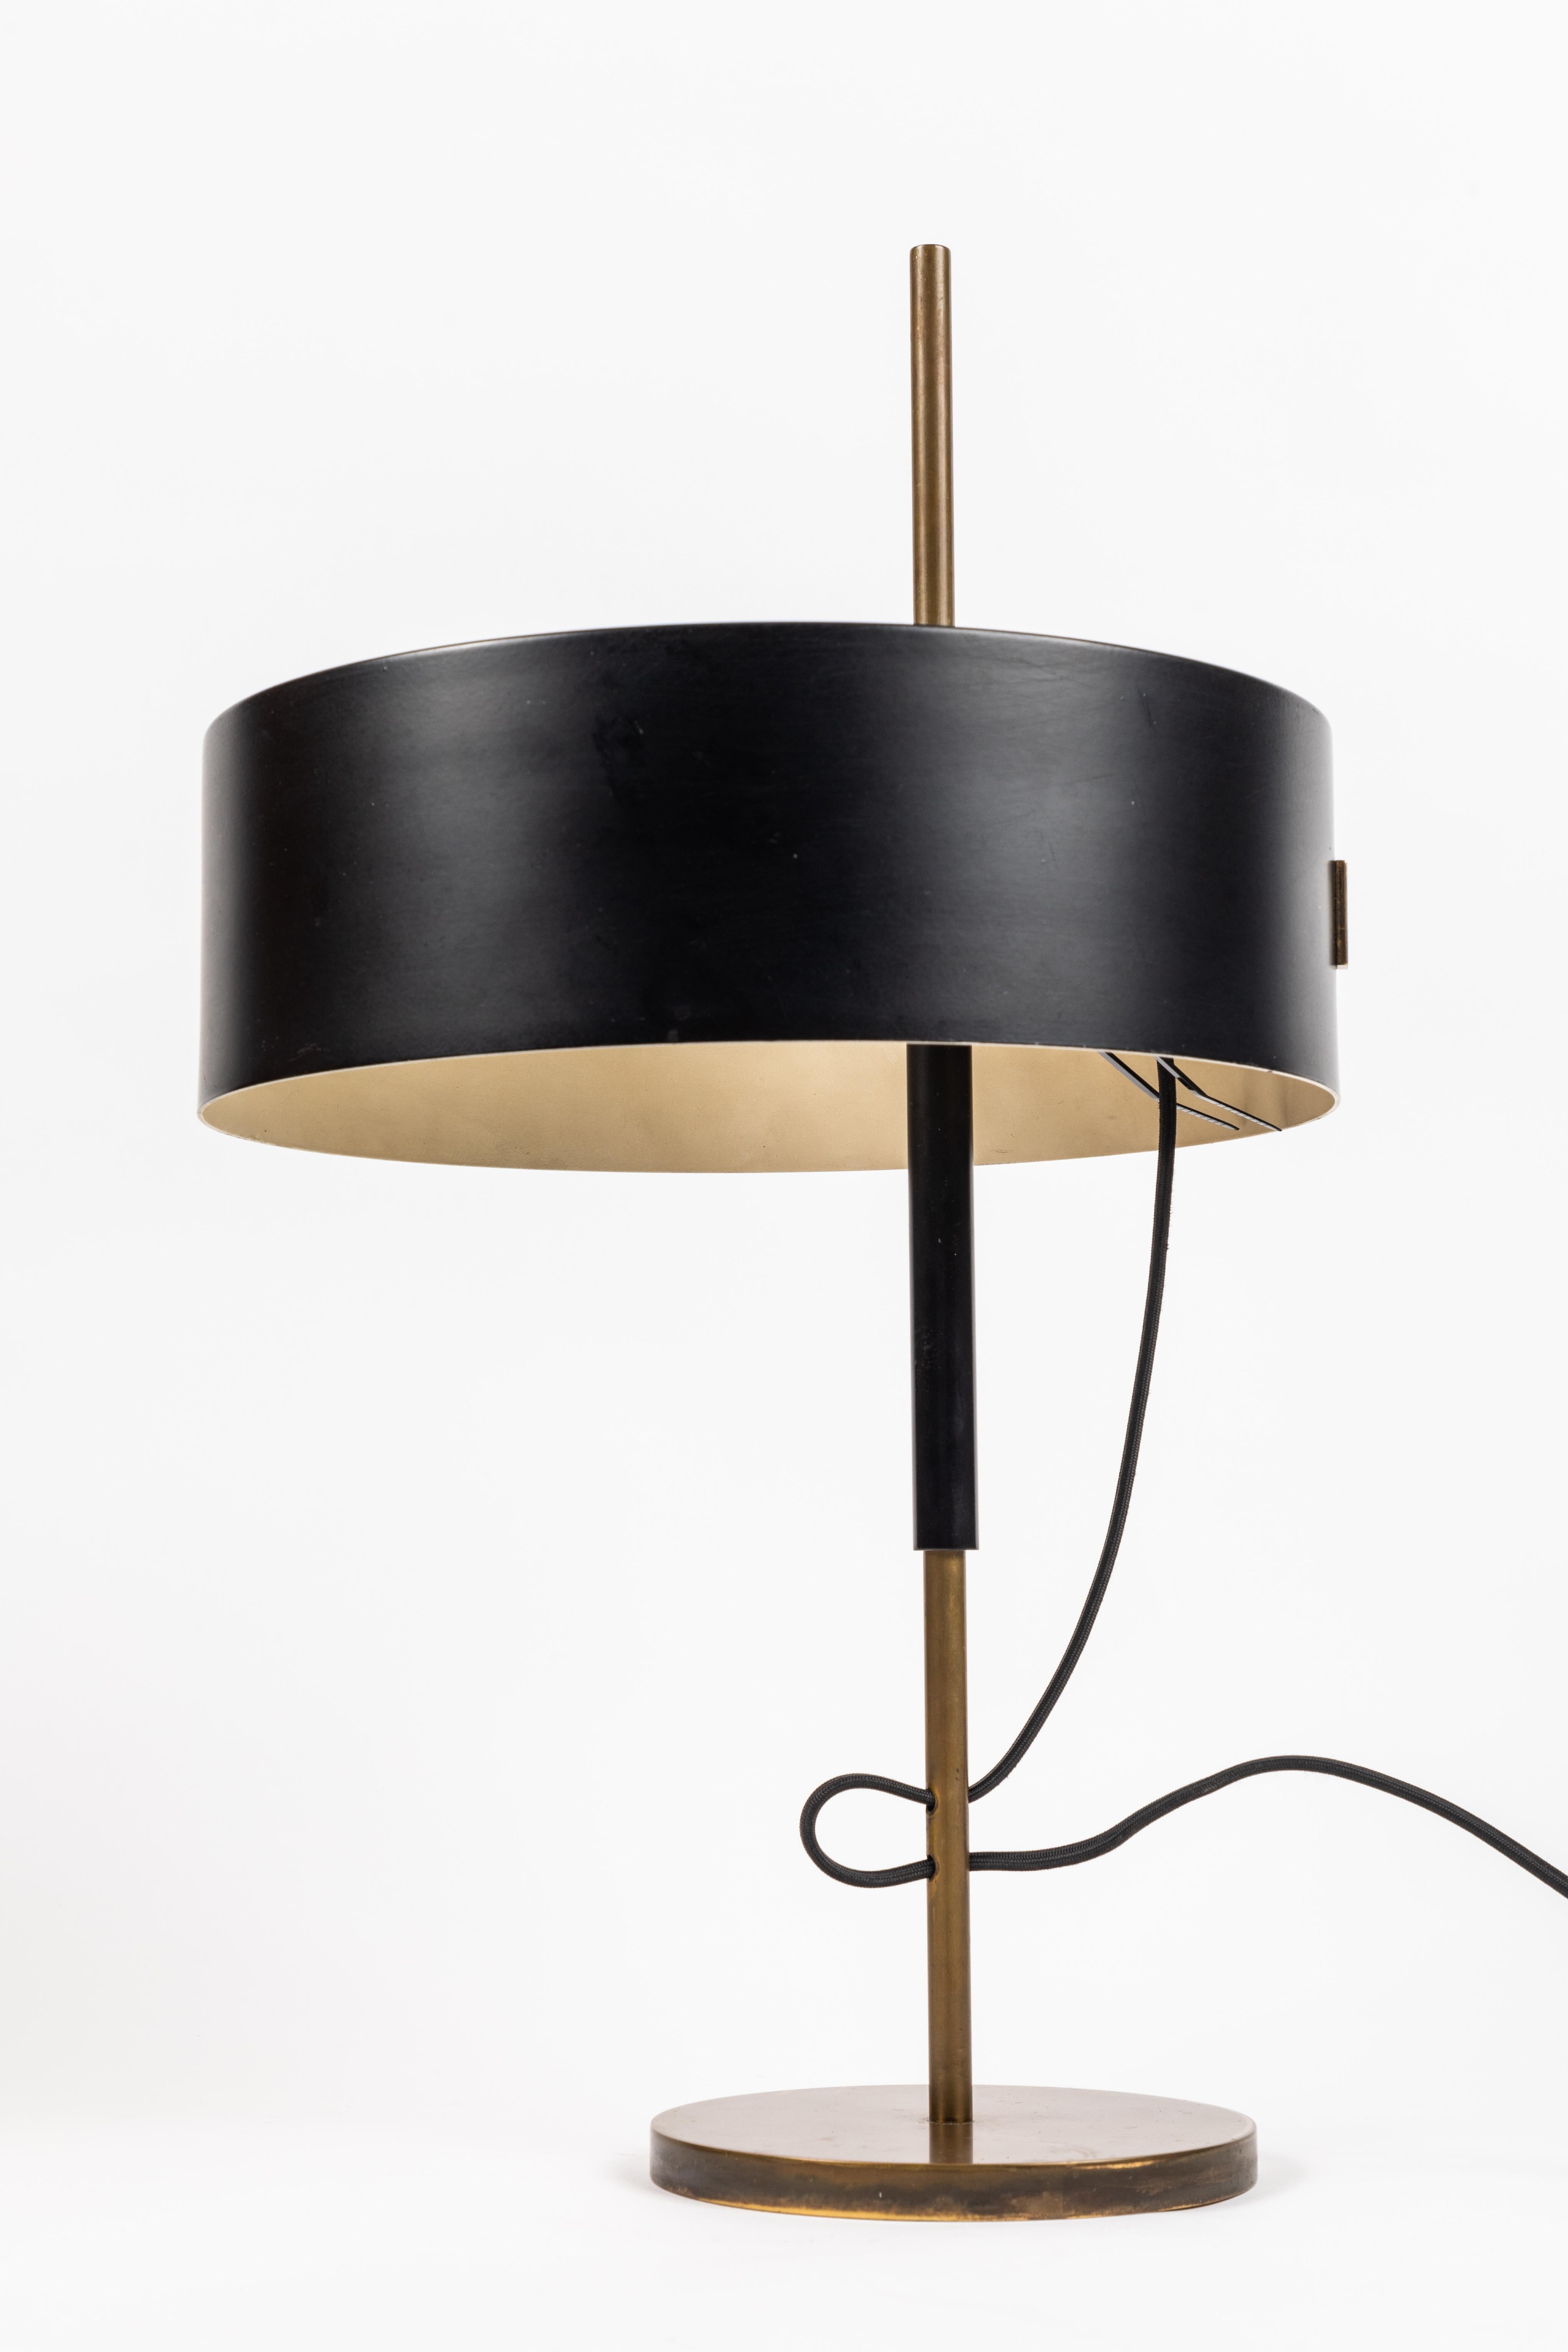 1950s Giuseppe Ostuni 243 table lamp for O-Luce. Executed in black painted metal and brass. An iconic table lamp by one of the masters of midcentury Italian design. Fluid and refined in its conception and execution. A clean example.

Ref. Literature